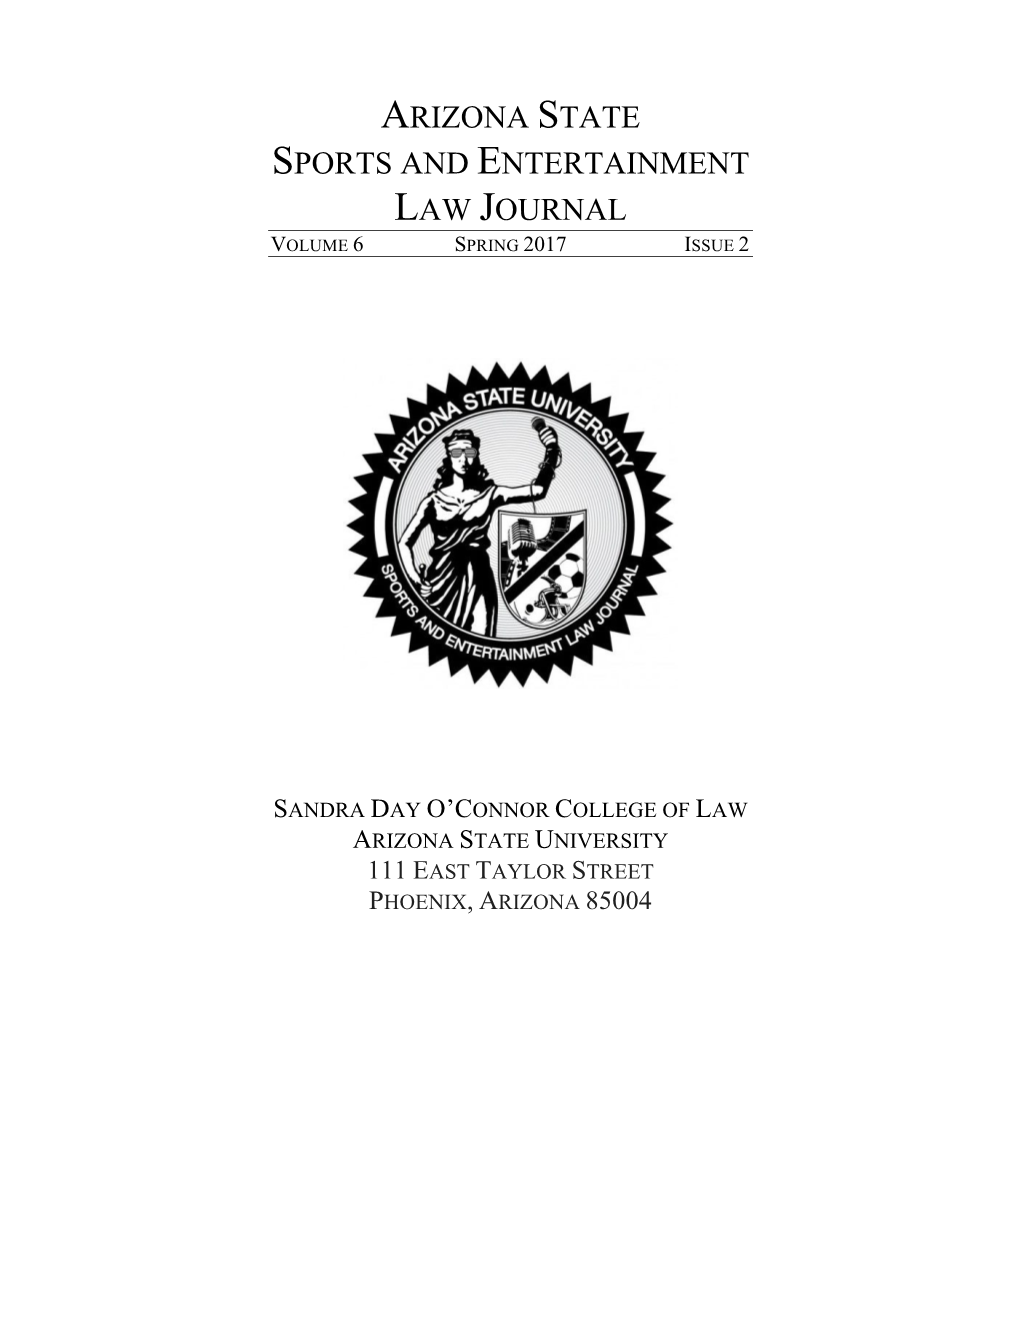 Arizona State Sports and Entertainment Law Journal Volume 6 Spring 2017 Issue 2